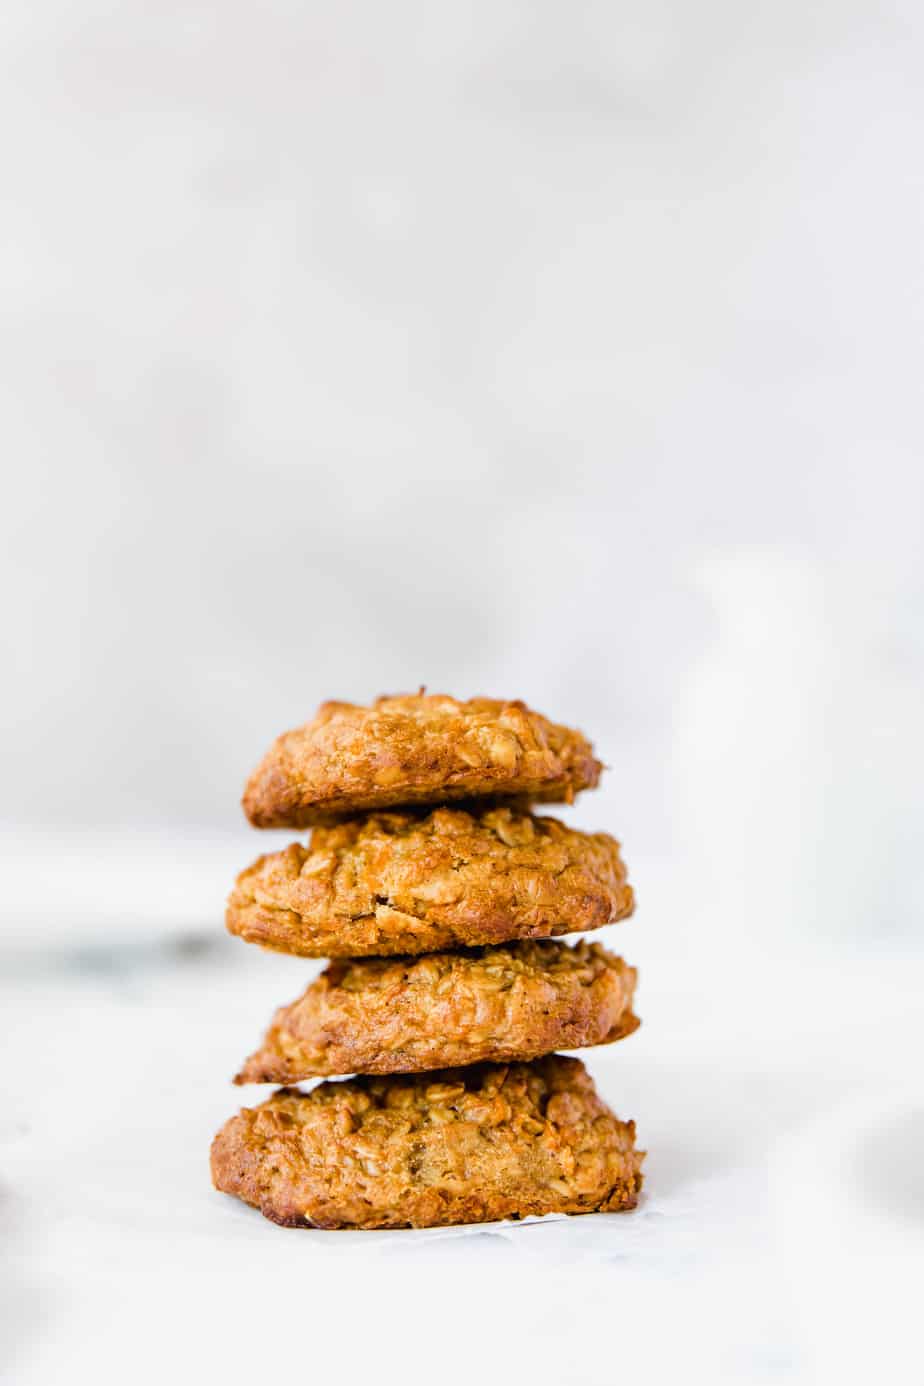 Healthy Cinnamon Carrot Cookies - Gluten-free, vegan cookies that are moist, delicious and easy to make.